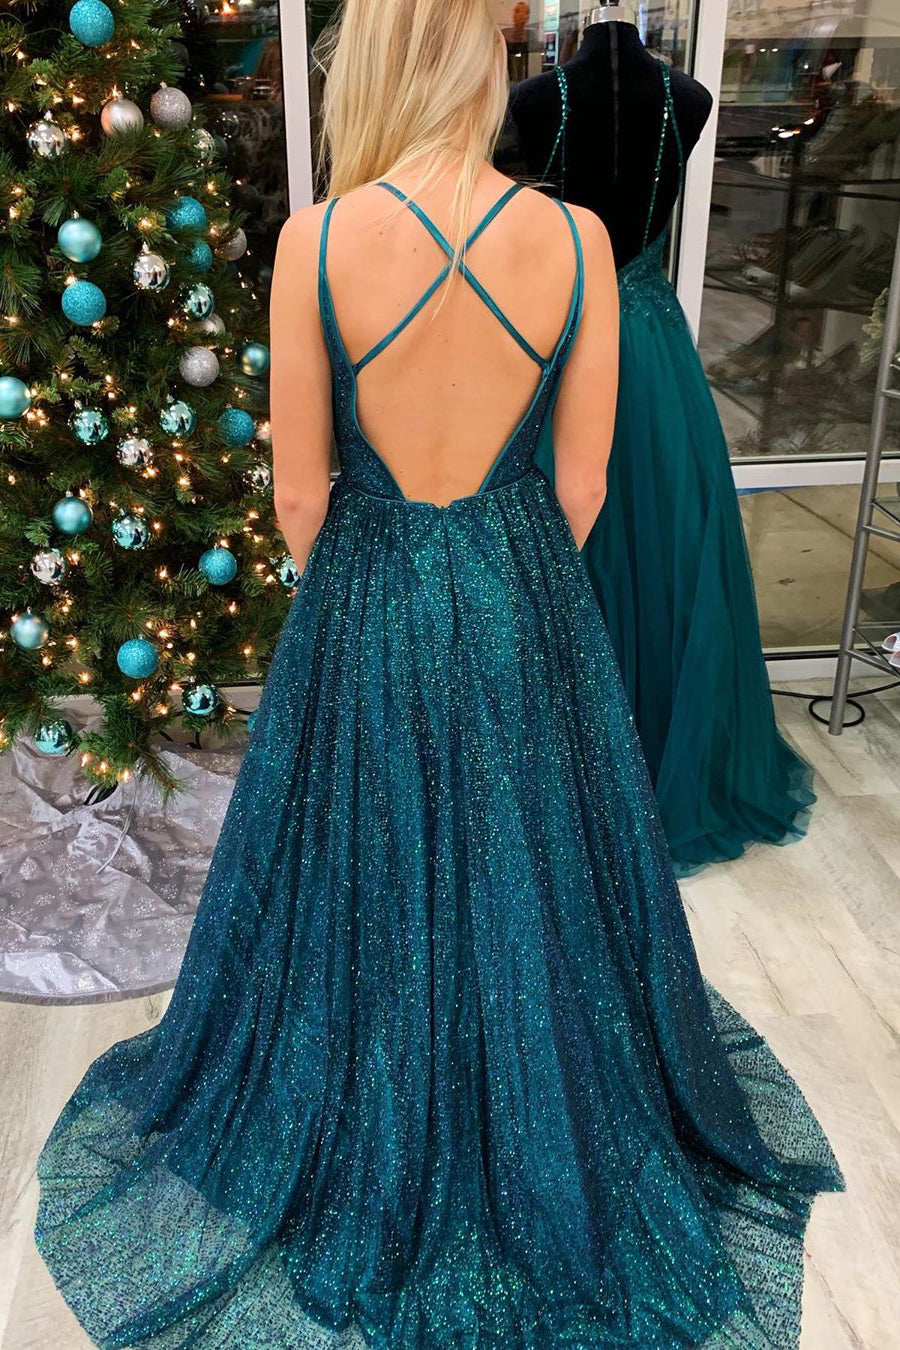 Glitter A-Line Teal Long Prom Dress with Spaghetti Straps